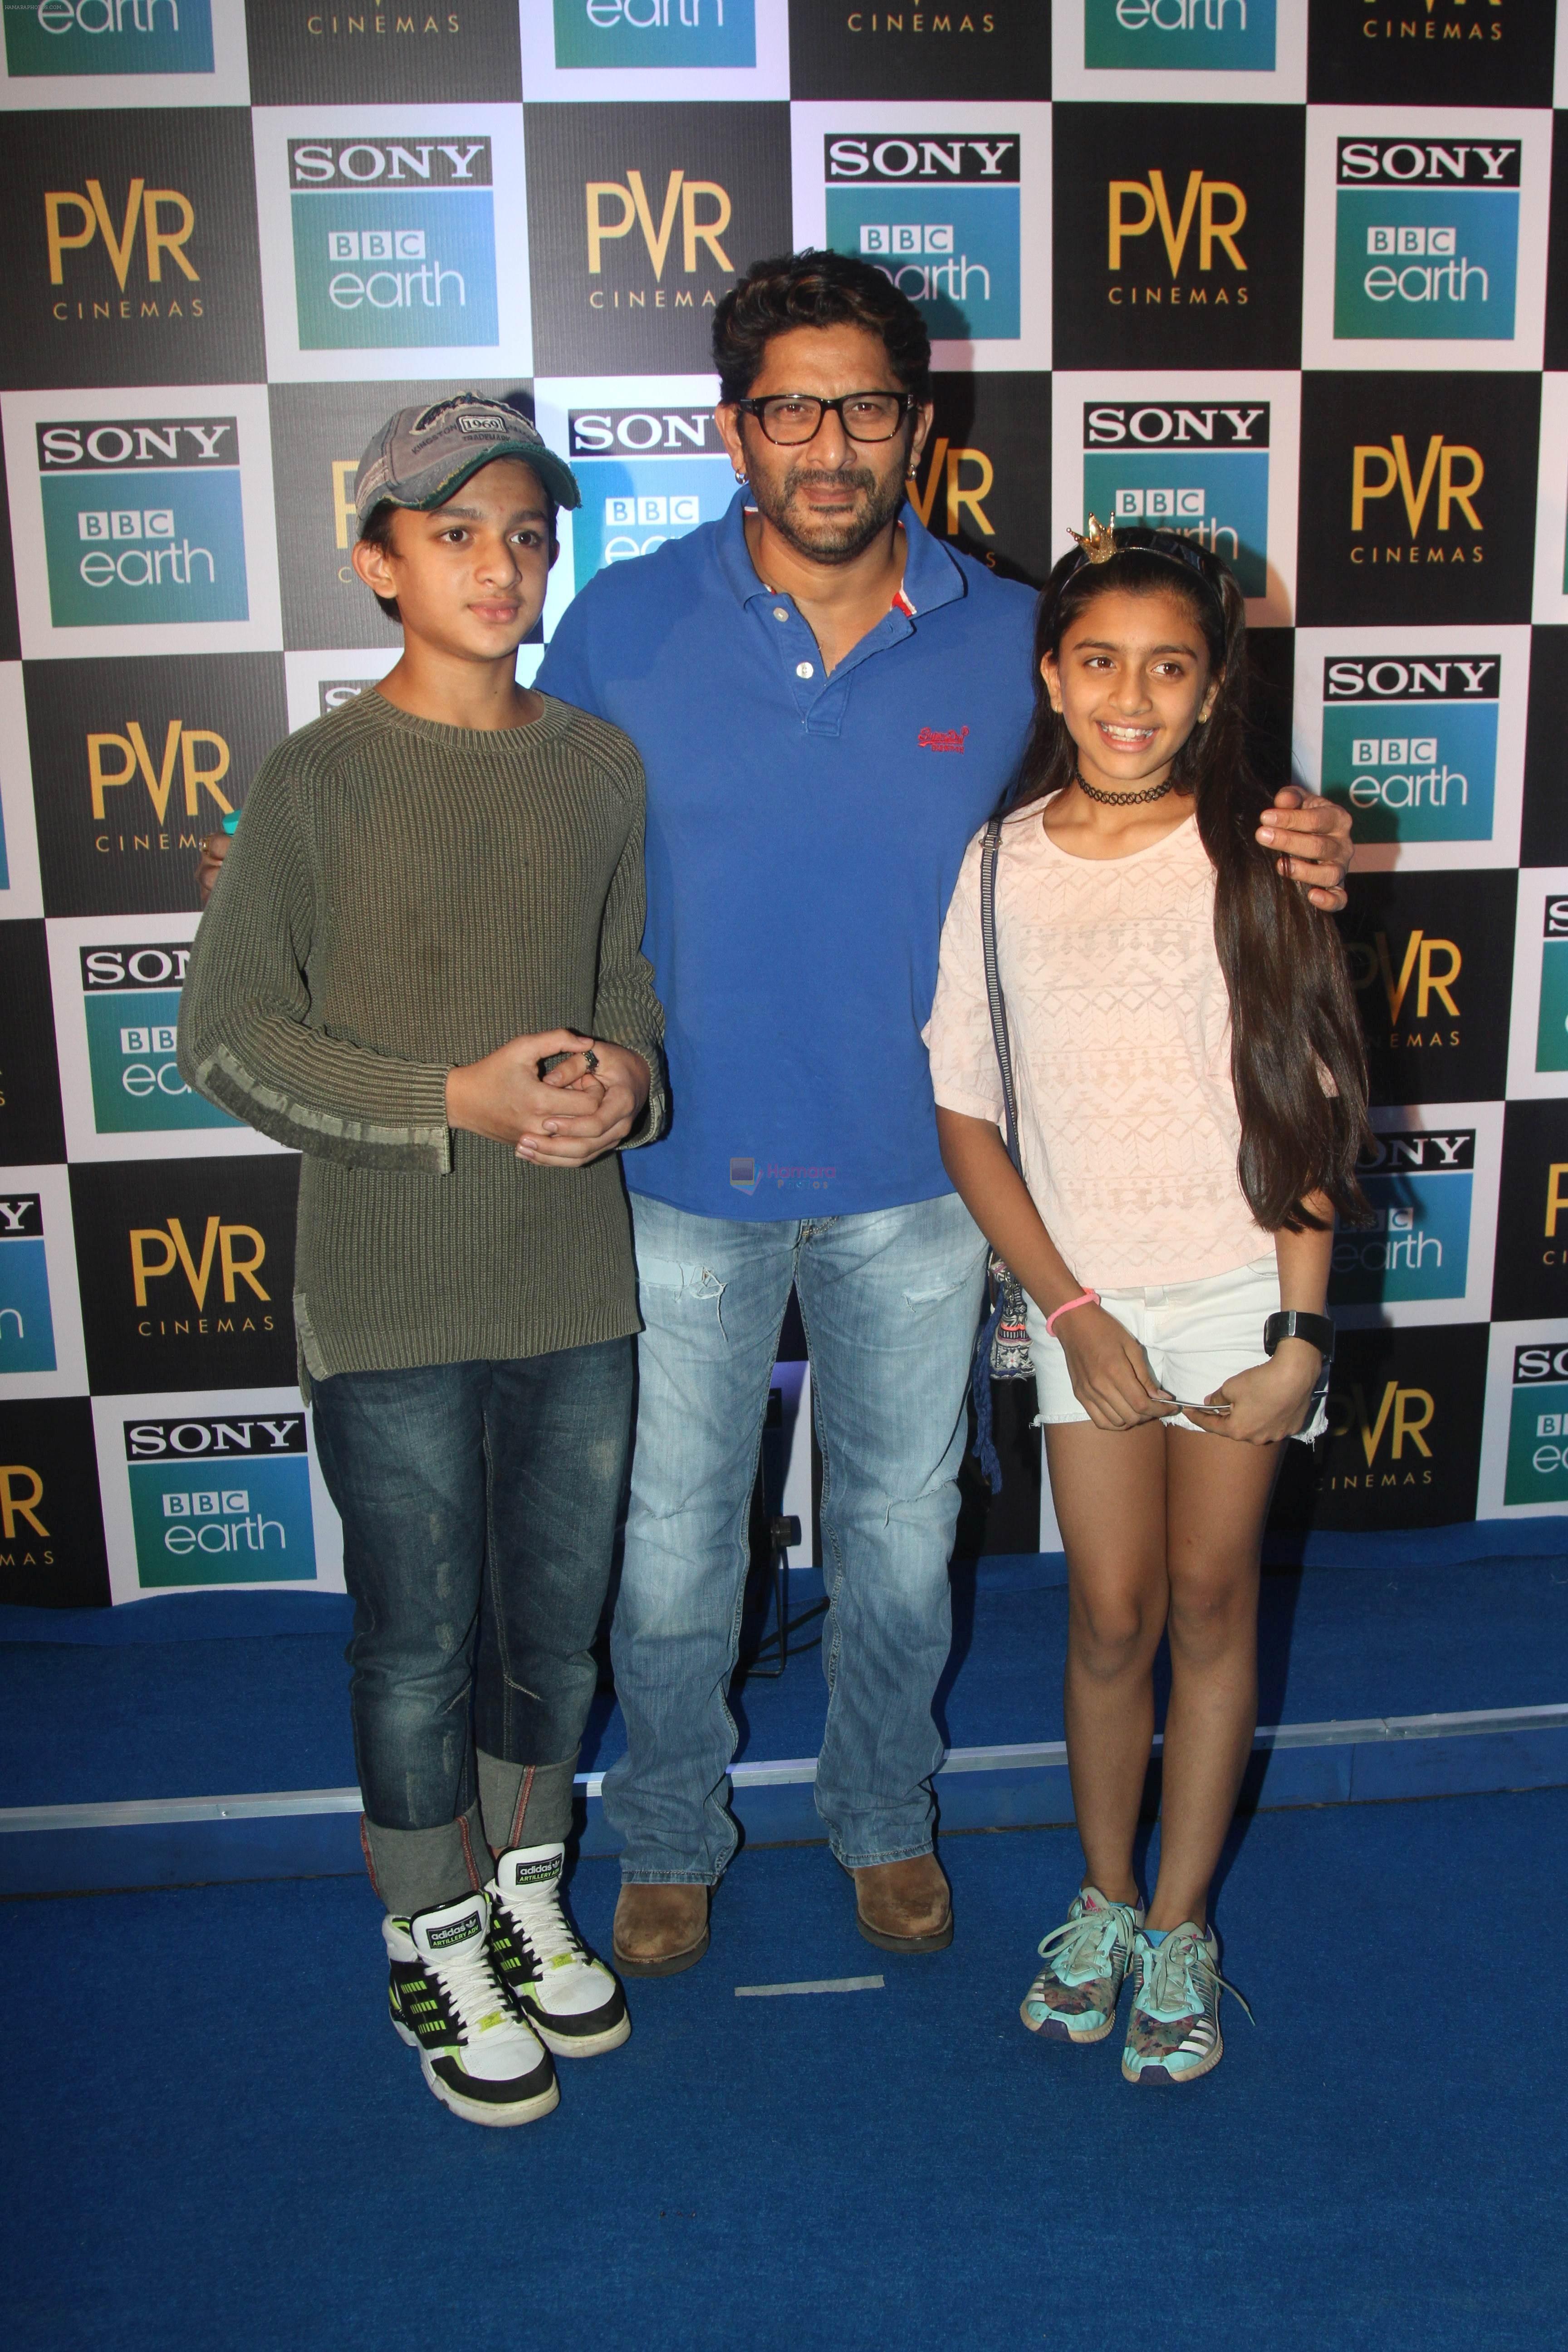 Arshad Warsi at the Screening of Sony BBC Earth's film Blue Planet 2 at pvr icon in andheri on 15th May 2018